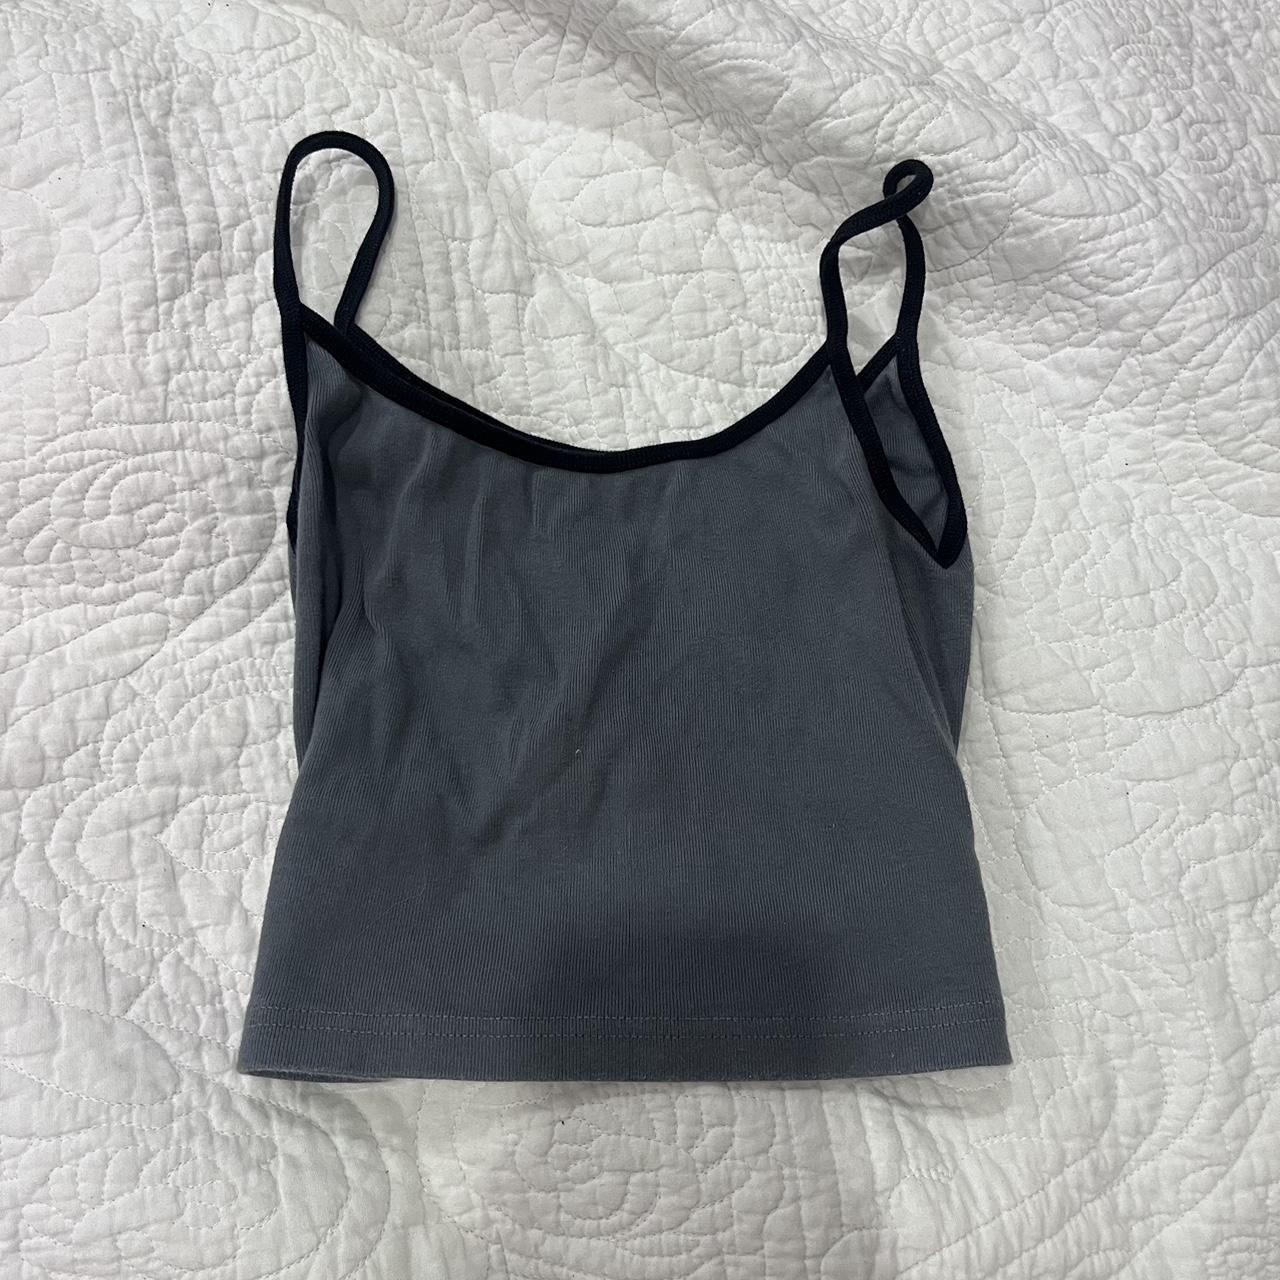 Cute brandy tank So soft and flattering Barely ever... - Depop